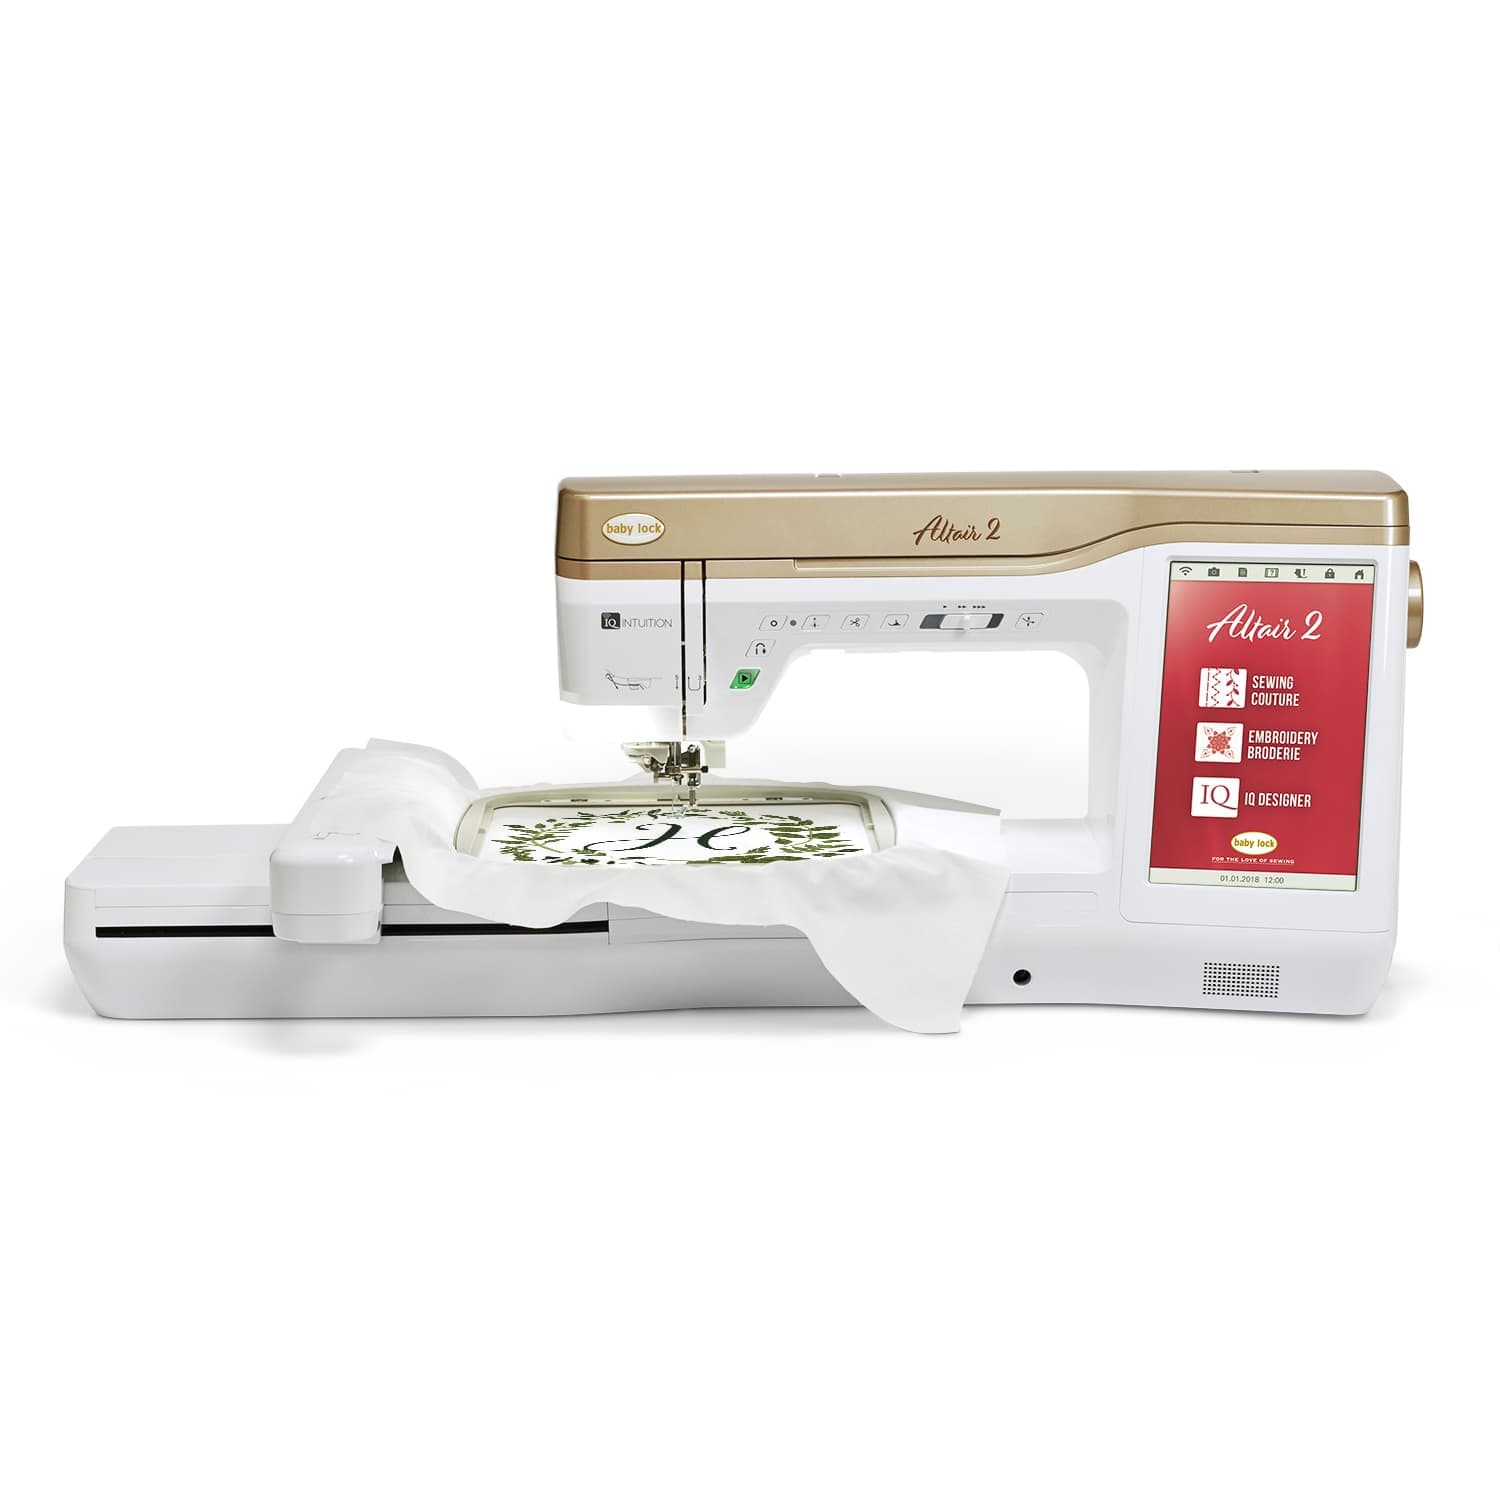 NEW Baby Lock Altair 2 Sewing & Embroidery Machine